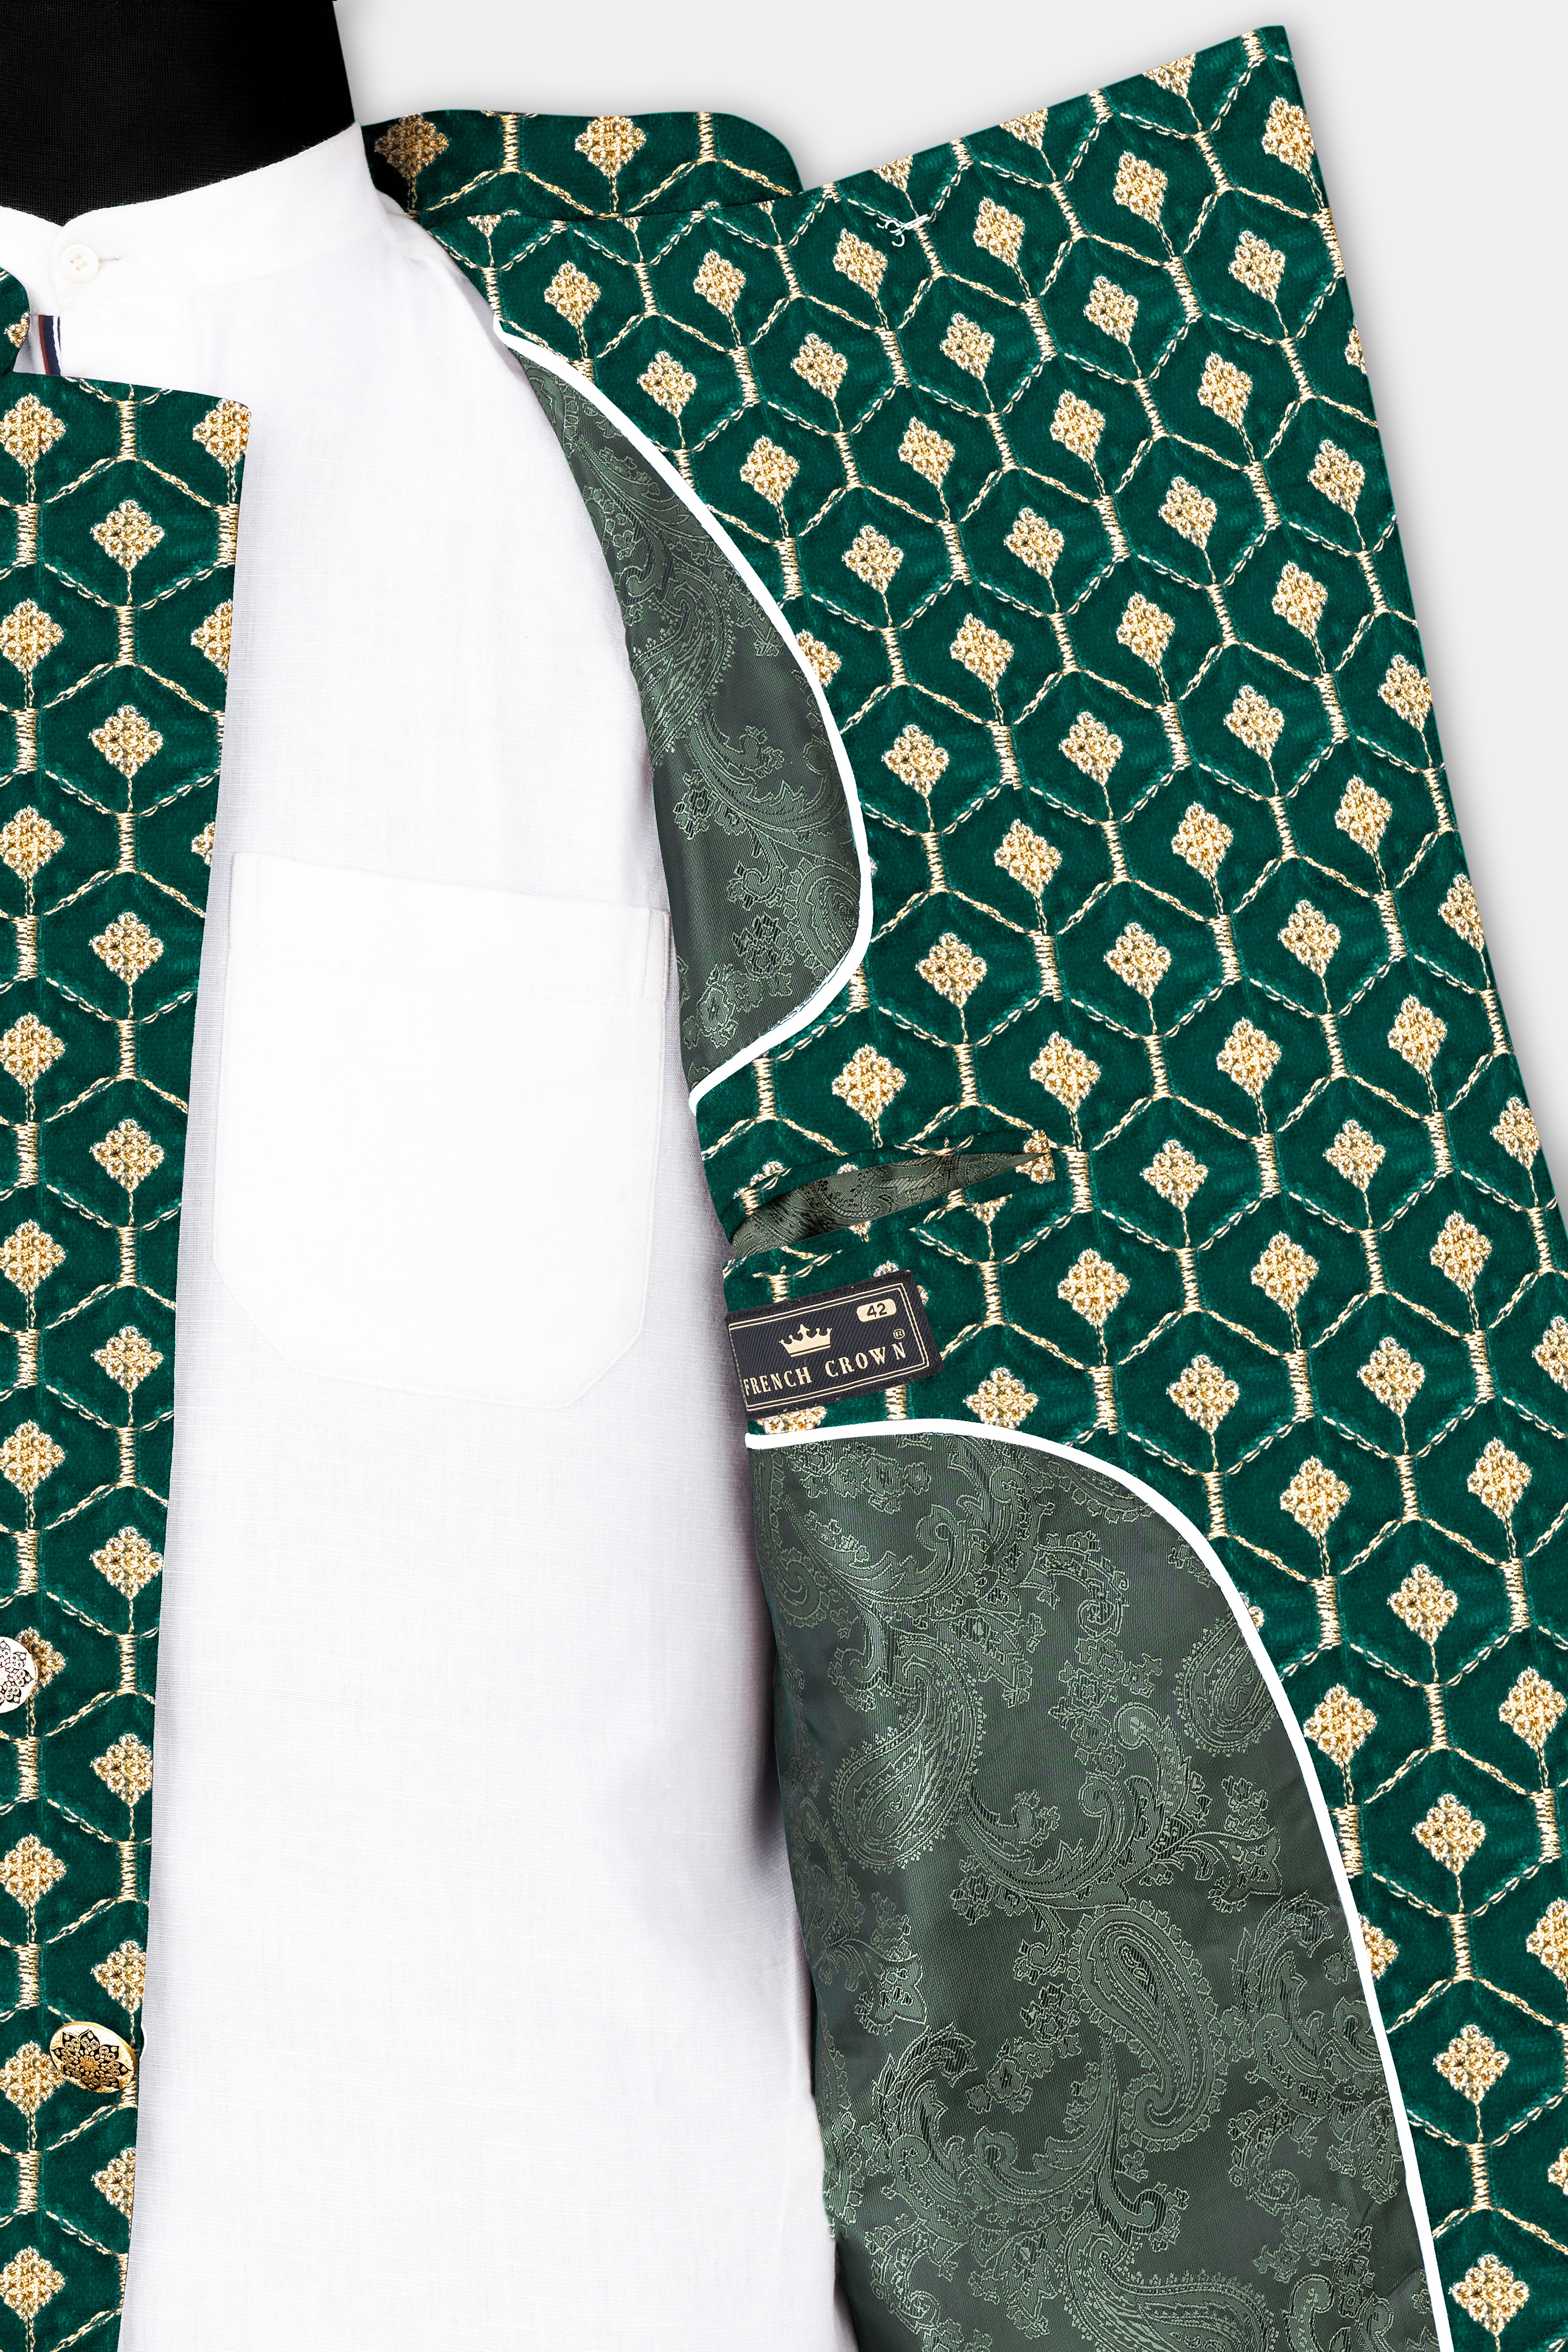 Sherpa Green and Givry Cream Hexagon Thread and Sequin Embroidered Cross Buttoned Bandhgala Jodhpuri BL3519-CBG-36, BL3519-CBG-38, BL3519-CBG-40, BL3519-CBG-42, BL3519-CBG-44, BL3519-CBG-46, BL3519-CBG-51, BL3519-CBG-50, BL3519-CBG-52, BL3519-CBG-54, BL3519-CBG-56, BL3519-CBG-58, BL3519-CBG-60